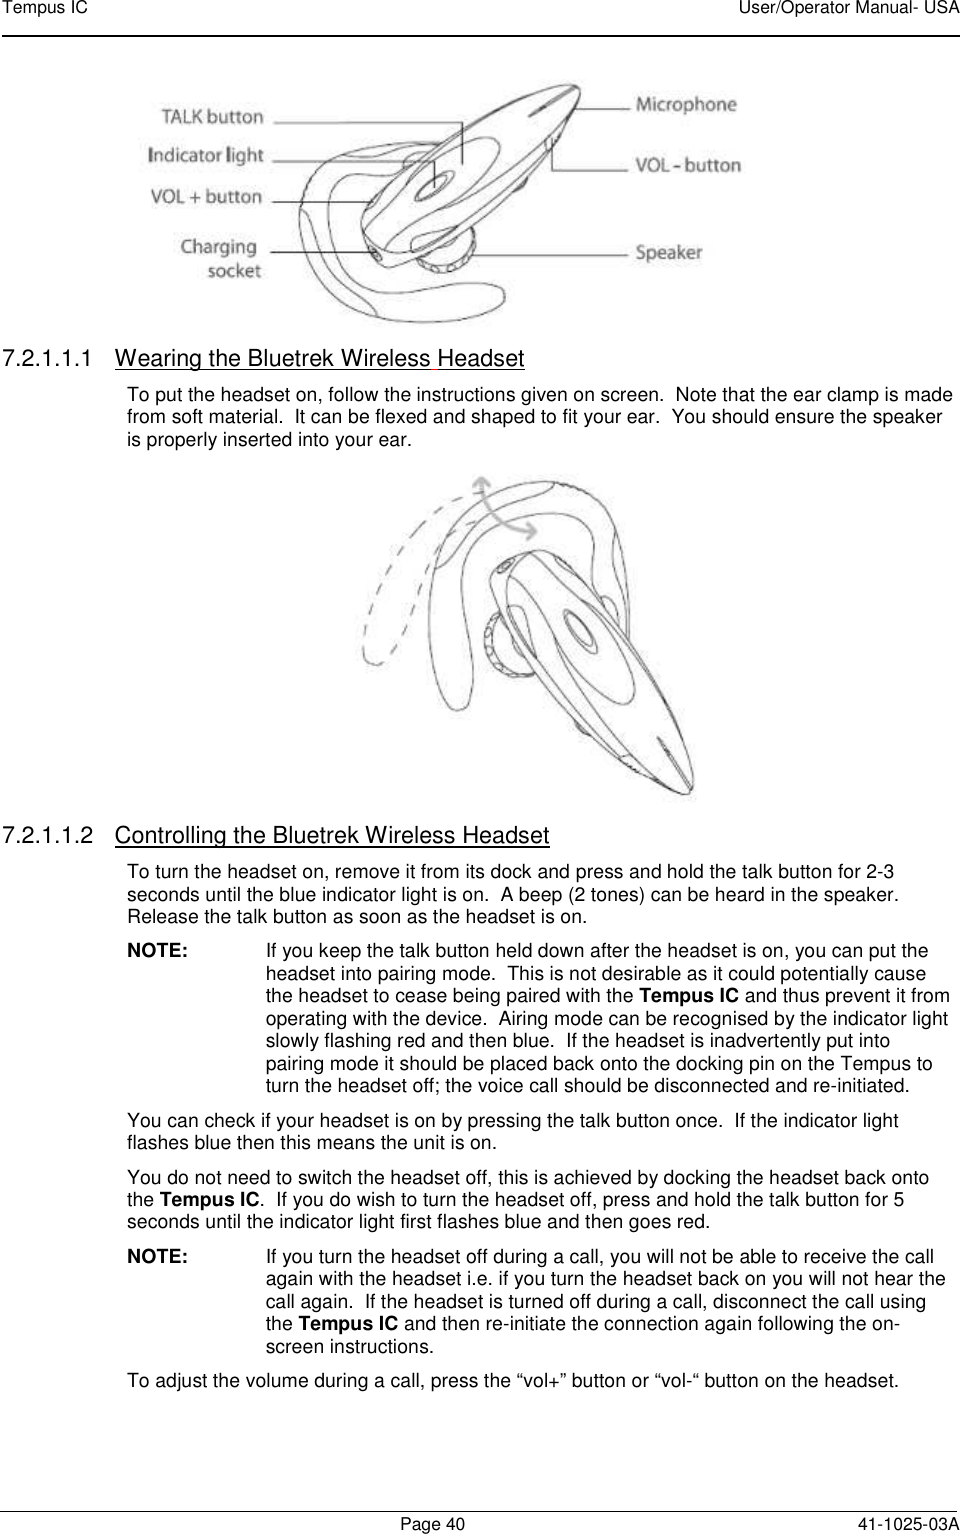 Tempus IC    User/Operator Manual- USA        Page 40  41-1025-03A  7.2.1.1.1  Wearing the Bluetrek Wireless Headset To put the headset on, follow the instructions given on screen.  Note that the ear clamp is made from soft material.  It can be flexed and shaped to fit your ear.  You should ensure the speaker is properly inserted into your ear.    7.2.1.1.2  Controlling the Bluetrek Wireless Headset To turn the headset on, remove it from its dock and press and hold the talk button for 2-3 seconds until the blue indicator light is on.  A beep (2 tones) can be heard in the speaker.  Release the talk button as soon as the headset is on. NOTE:  If you keep the talk button held down after the headset is on, you can put the headset into pairing mode.  This is not desirable as it could potentially cause the headset to cease being paired with the Tempus IC and thus prevent it from operating with the device.  Airing mode can be recognised by the indicator light slowly flashing red and then blue.  If the headset is inadvertently put into pairing mode it should be placed back onto the docking pin on the Tempus to turn the headset off; the voice call should be disconnected and re-initiated. You can check if your headset is on by pressing the talk button once.  If the indicator light flashes blue then this means the unit is on. You do not need to switch the headset off, this is achieved by docking the headset back onto the Tempus IC.  If you do wish to turn the headset off, press and hold the talk button for 5 seconds until the indicator light first flashes blue and then goes red. NOTE:  If you turn the headset off during a call, you will not be able to receive the call again with the headset i.e. if you turn the headset back on you will not hear the call again.  If the headset is turned off during a call, disconnect the call using the Tempus IC and then re-initiate the connection again following the on-screen instructions. To adjust the volume during a call, press the “vol+” button or “vol-“ button on the headset. 